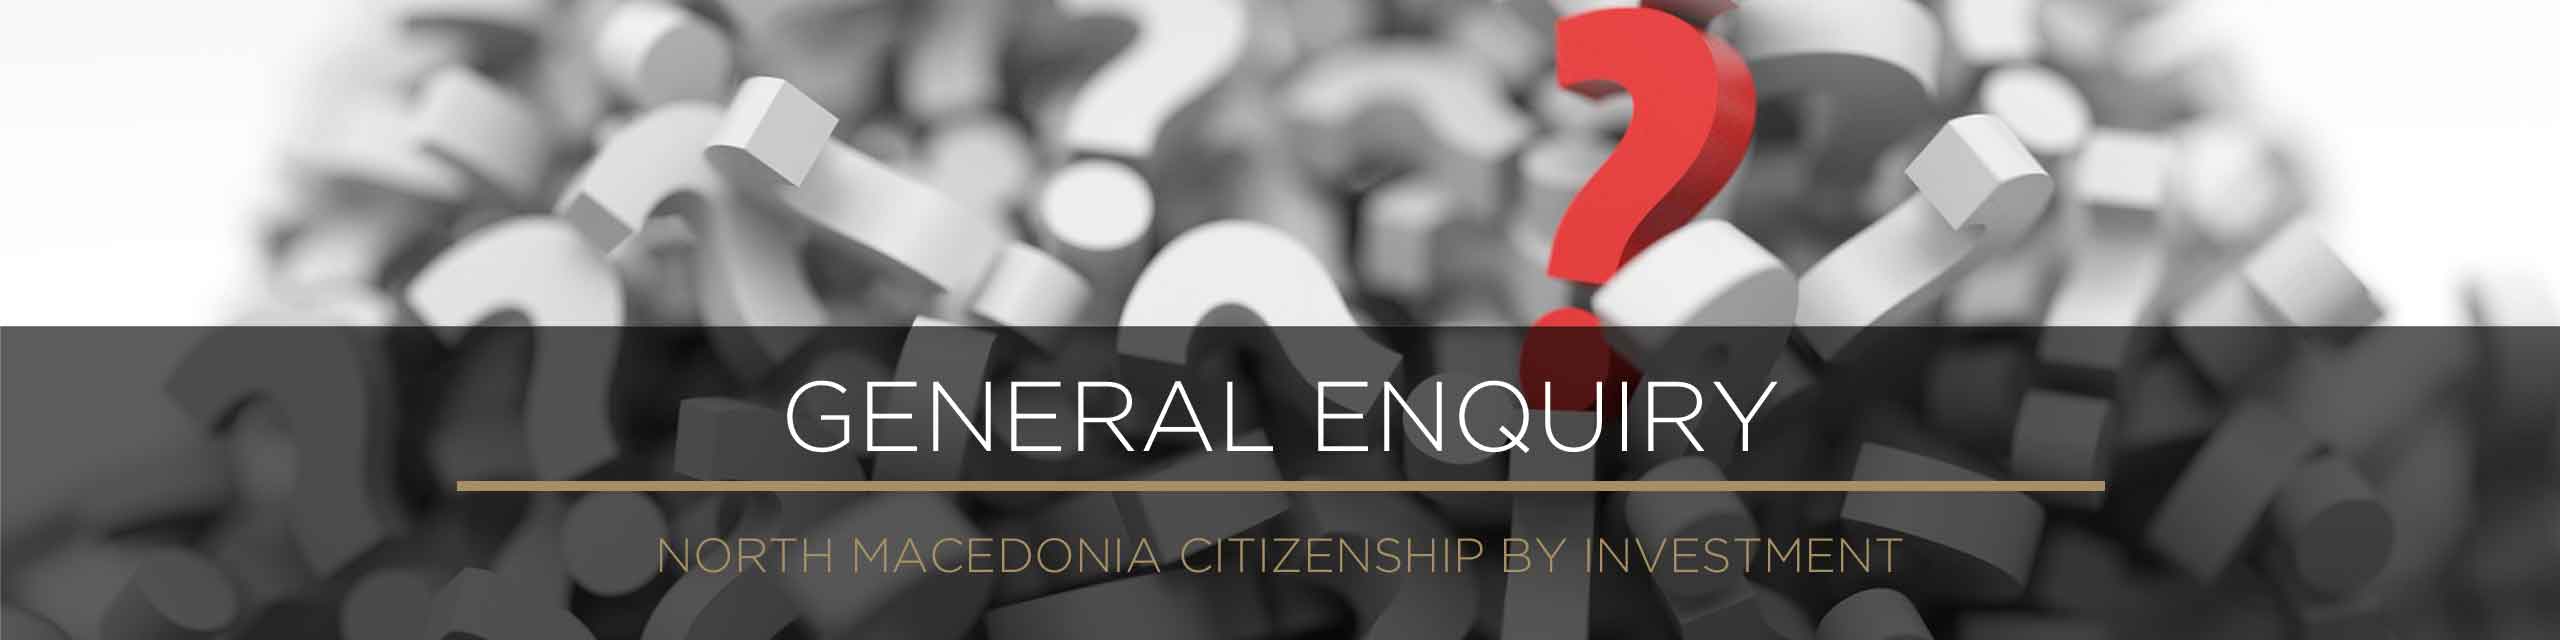 General Enquiry of GCI - Global Citizenship Investment